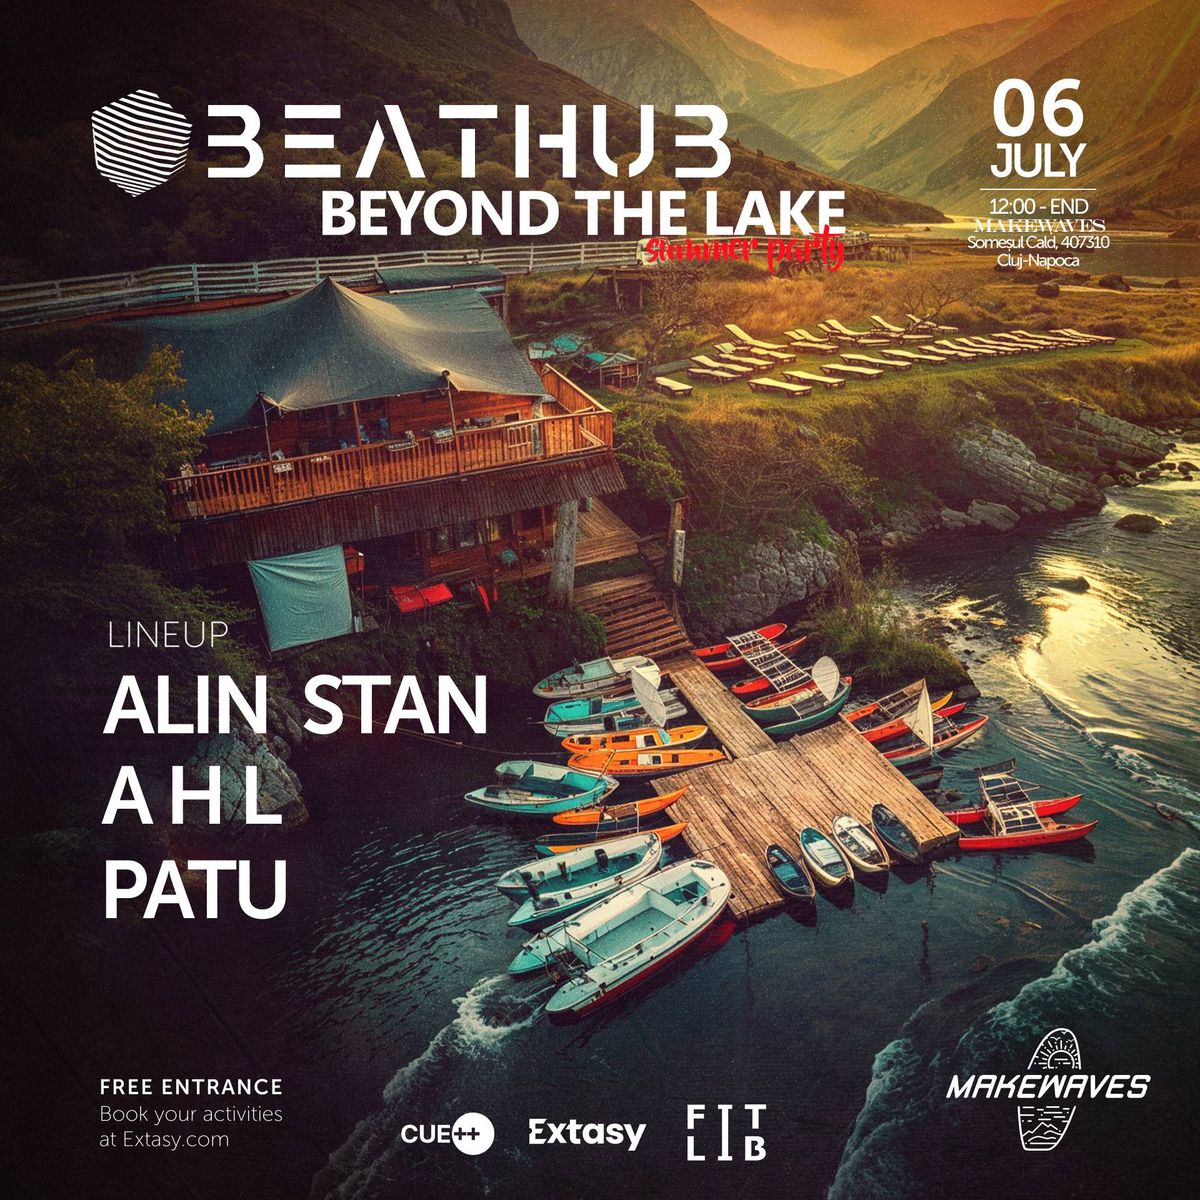 BEATHUB BEYOND THE LAKE summer party